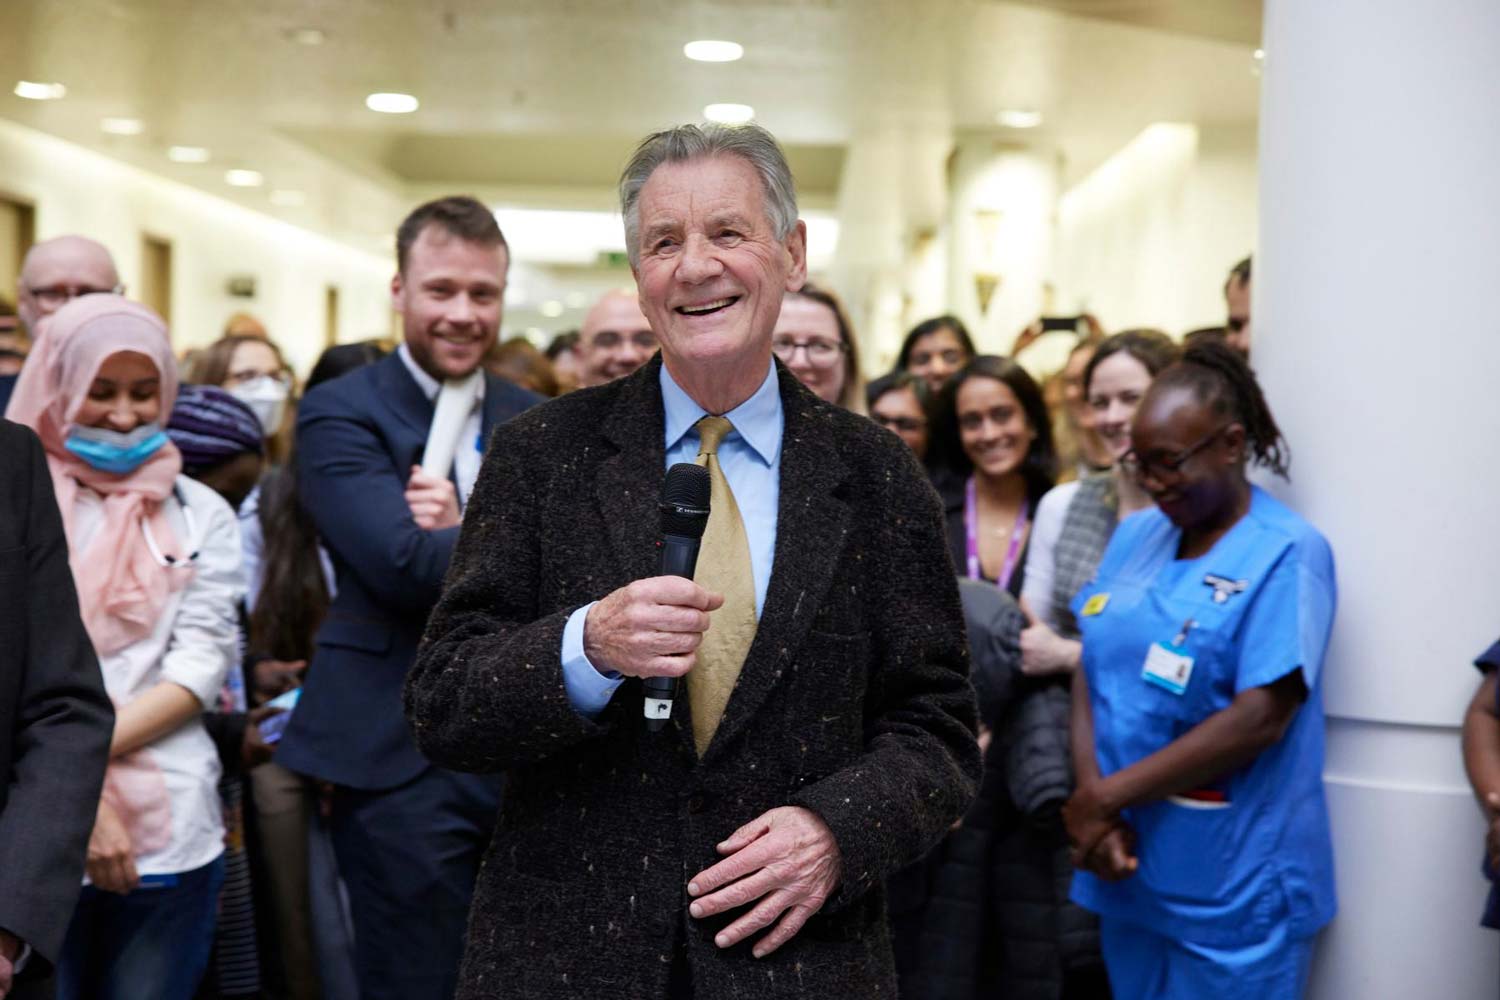 Micheal Palin pays tribute to the Barts staff who saved his life